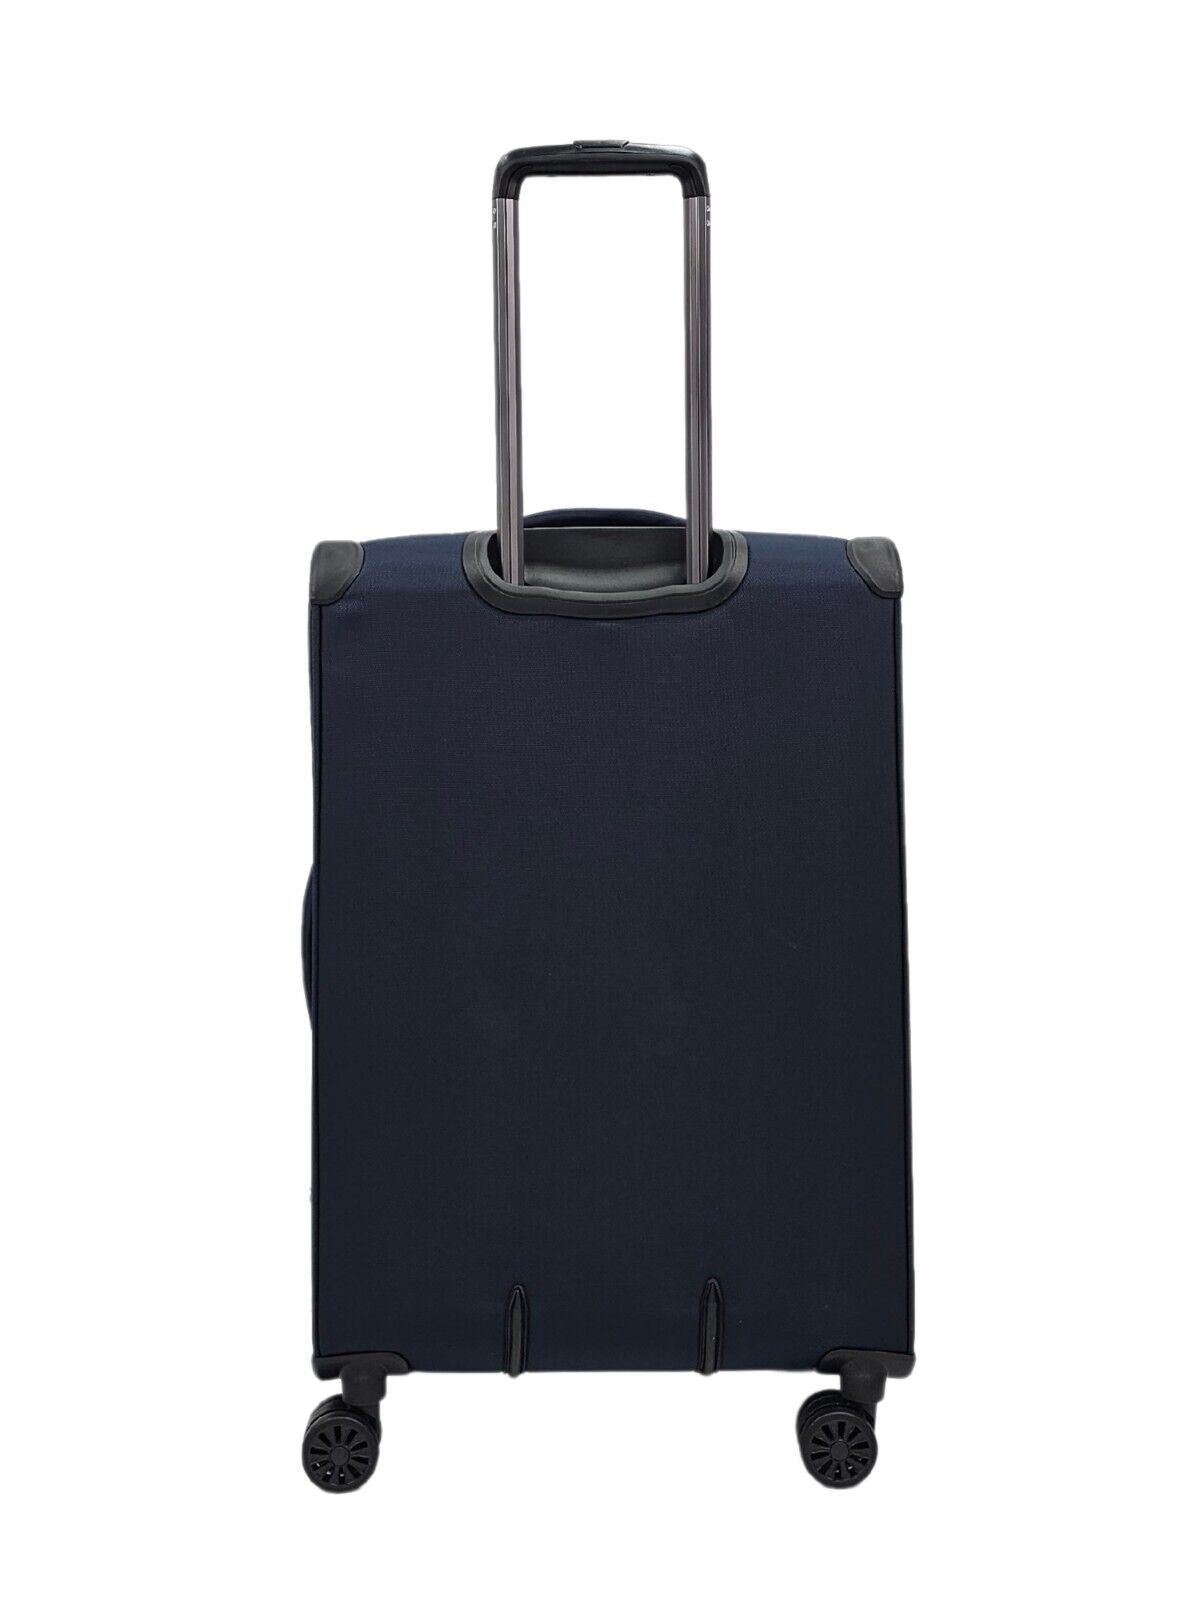 Lightweight Navy Blue Suitcases 4 Wheel Luggage Travel Cabin Bag - Upperclass Fashions 